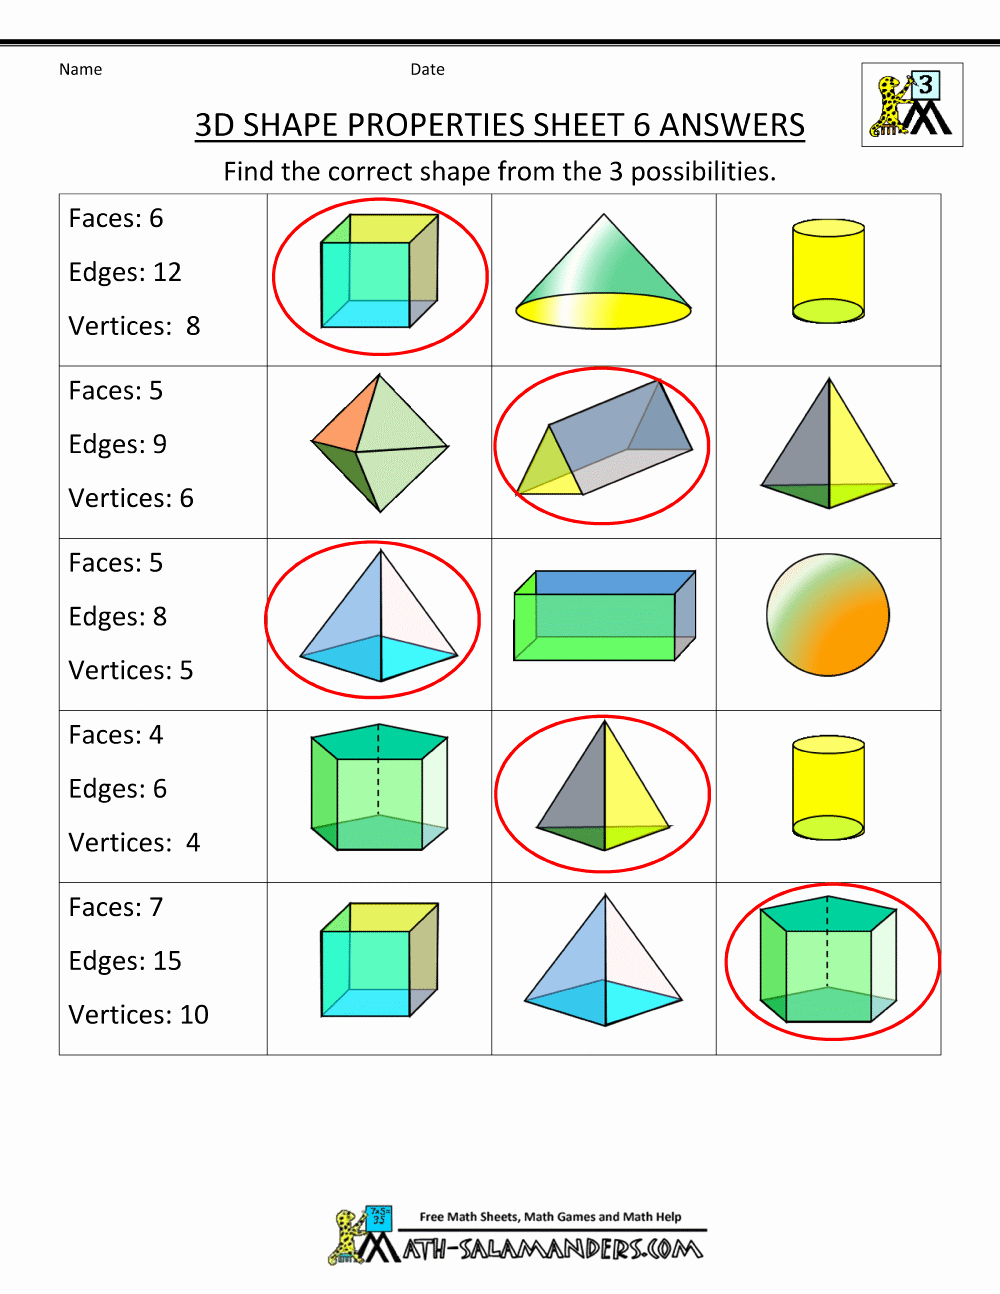 3d Shapes Worksheets 2nd Grade Beautiful solid Shapes Worksheet for 2nd Grade attributes Of solid